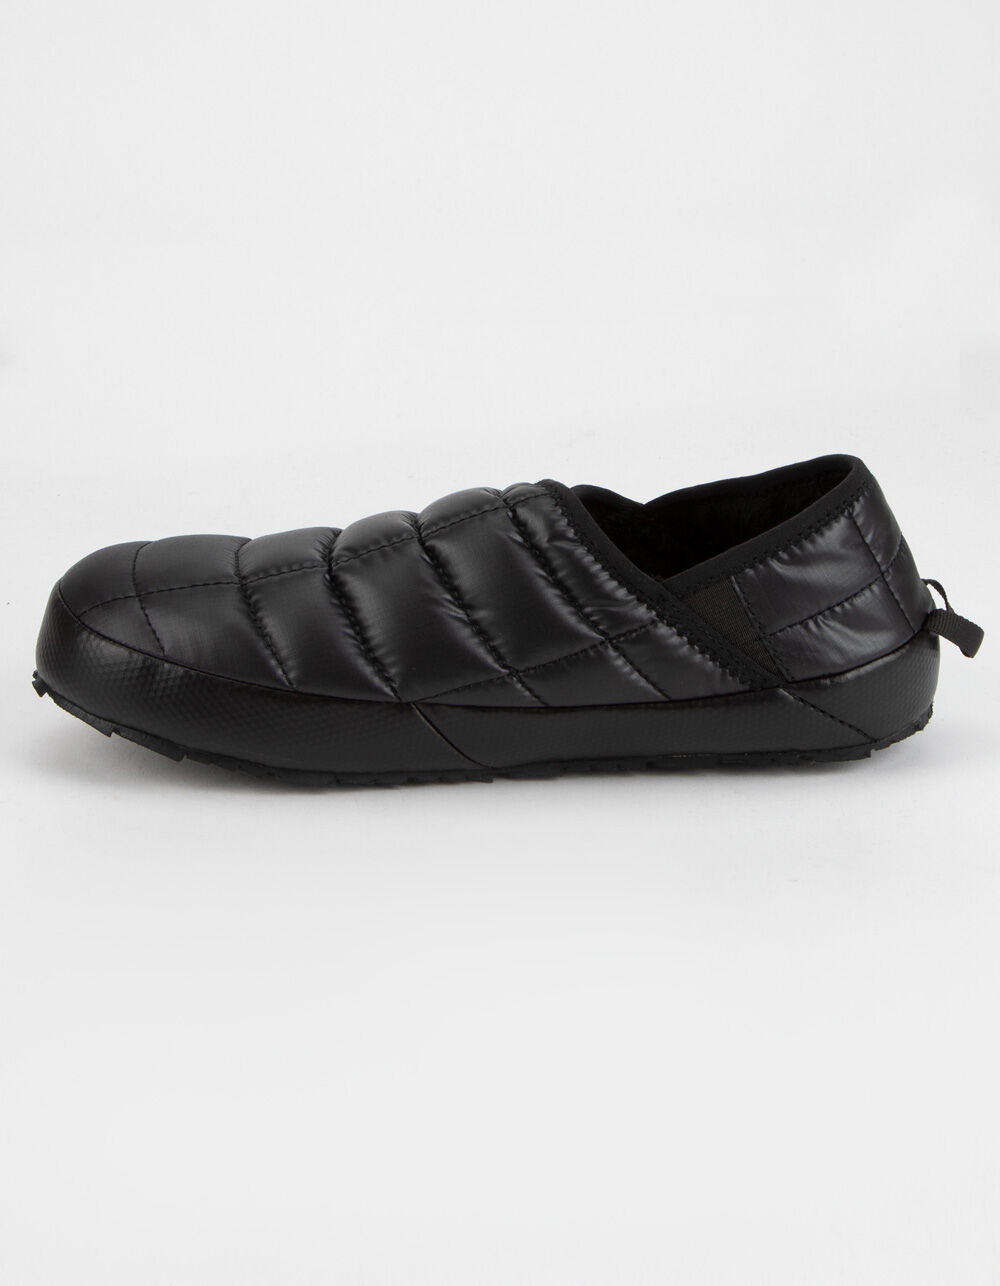 kasteel Idioot Roei uit THE NORTH FACE Thermoball Traction Womens Slippers - BLACK | Tillys